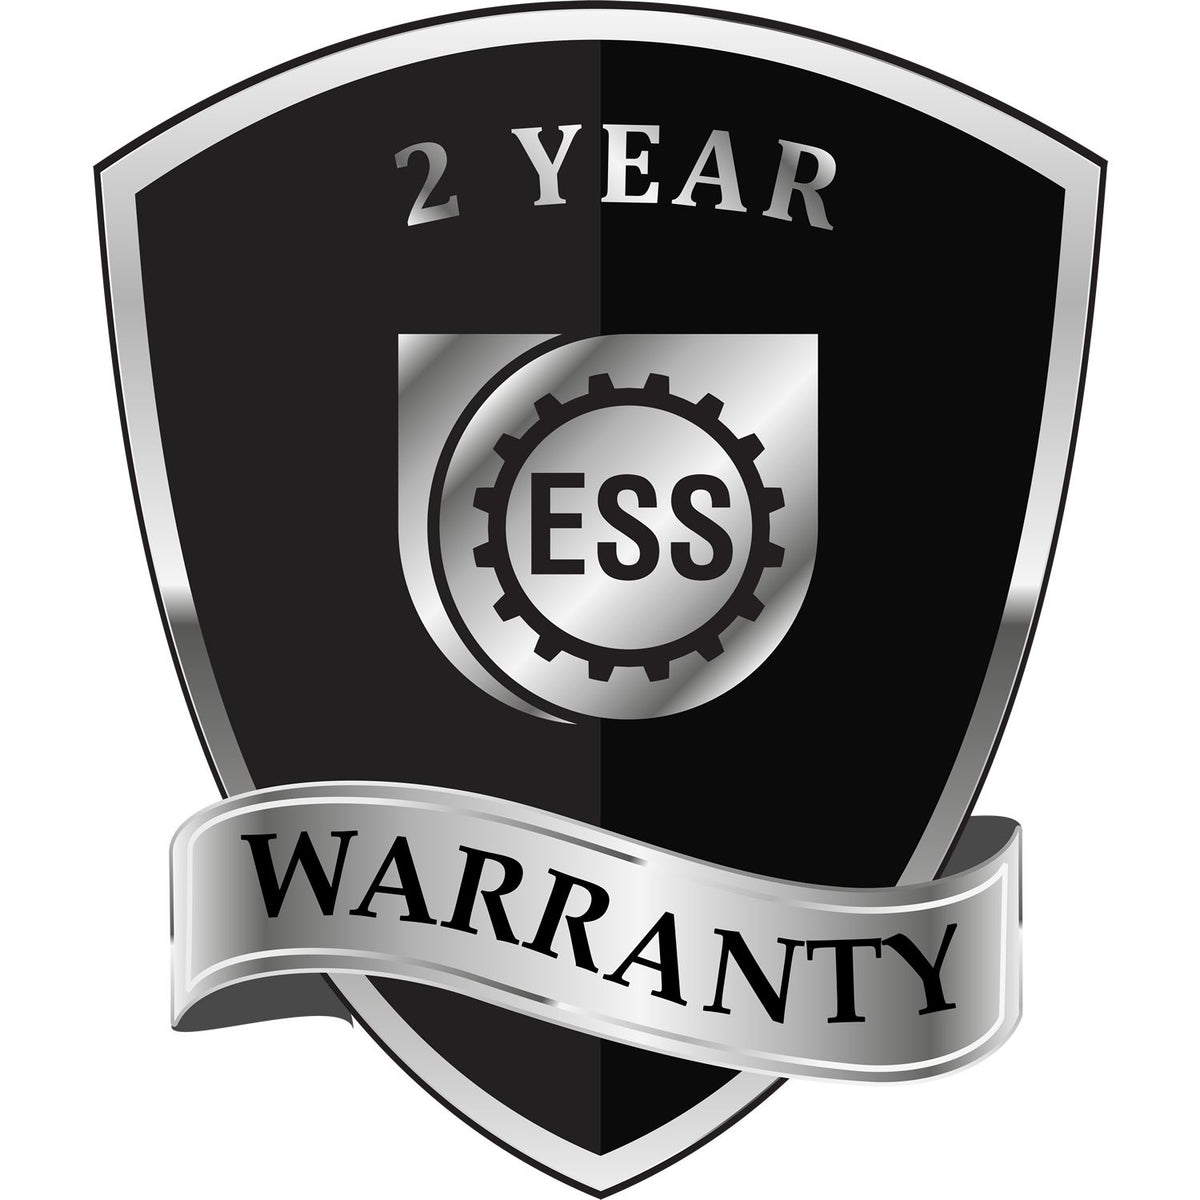 A black and silver badge or emblem showing warranty information for the State of New Hampshire Extended Long Reach Geologist Seal